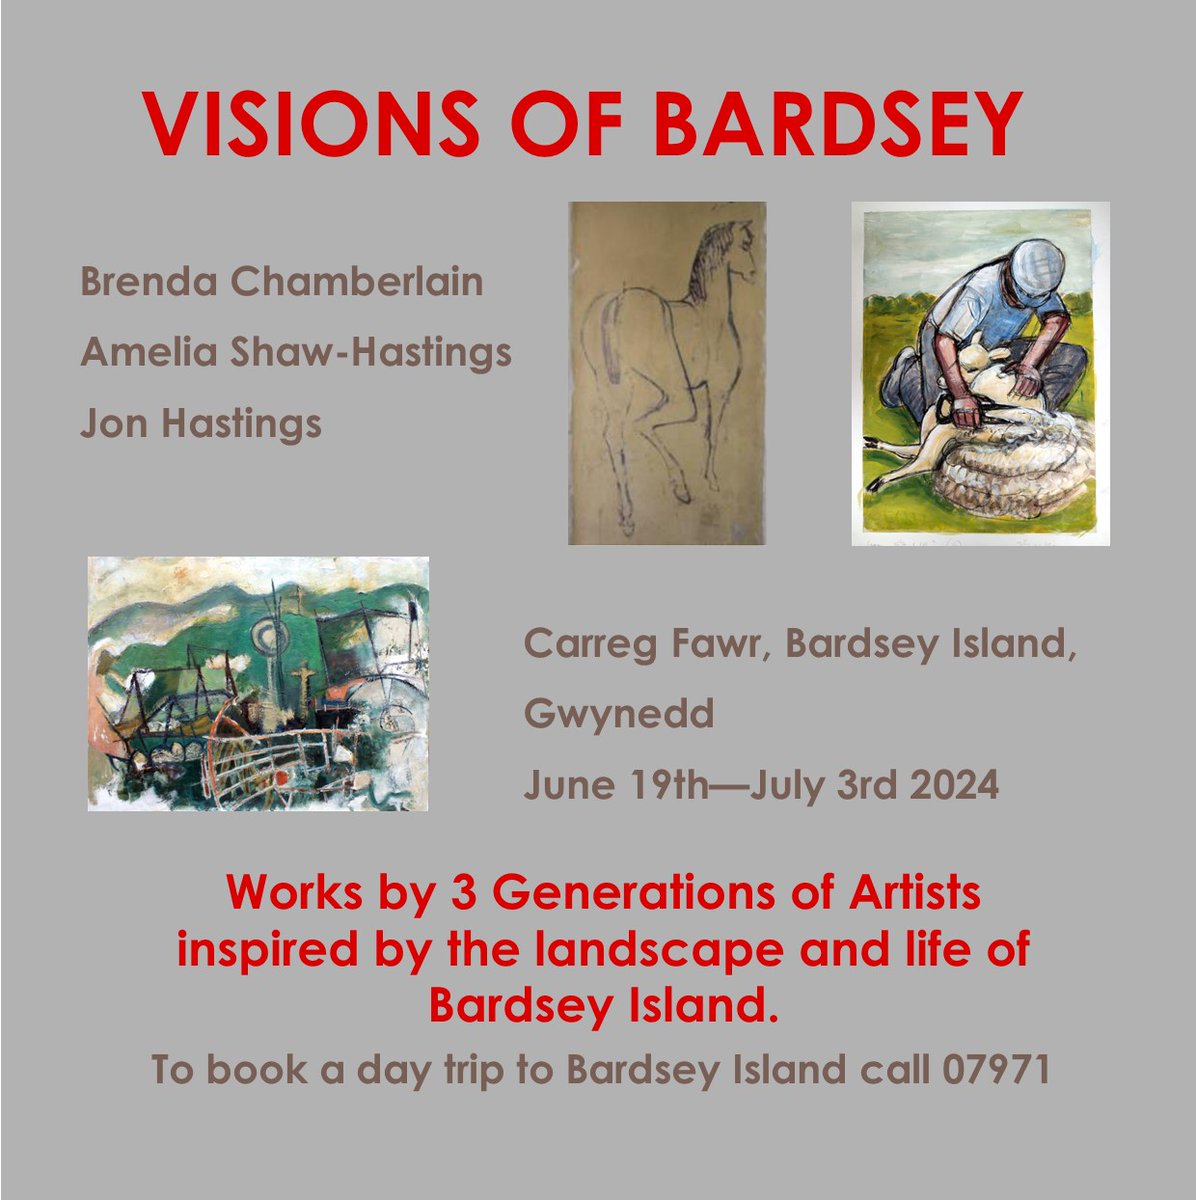 An opportunity to visit Carreg Fawr, Enlli and view Brenda Chamberlain's murals, as well as an exhibition of works by Amelia Shaw-Hastings and Jon Hastings.
.
.
#ArtExhibition #BrendaChamberlain #Art #Arts  #bardseyisland #enlli #bardsey #ynysenlli